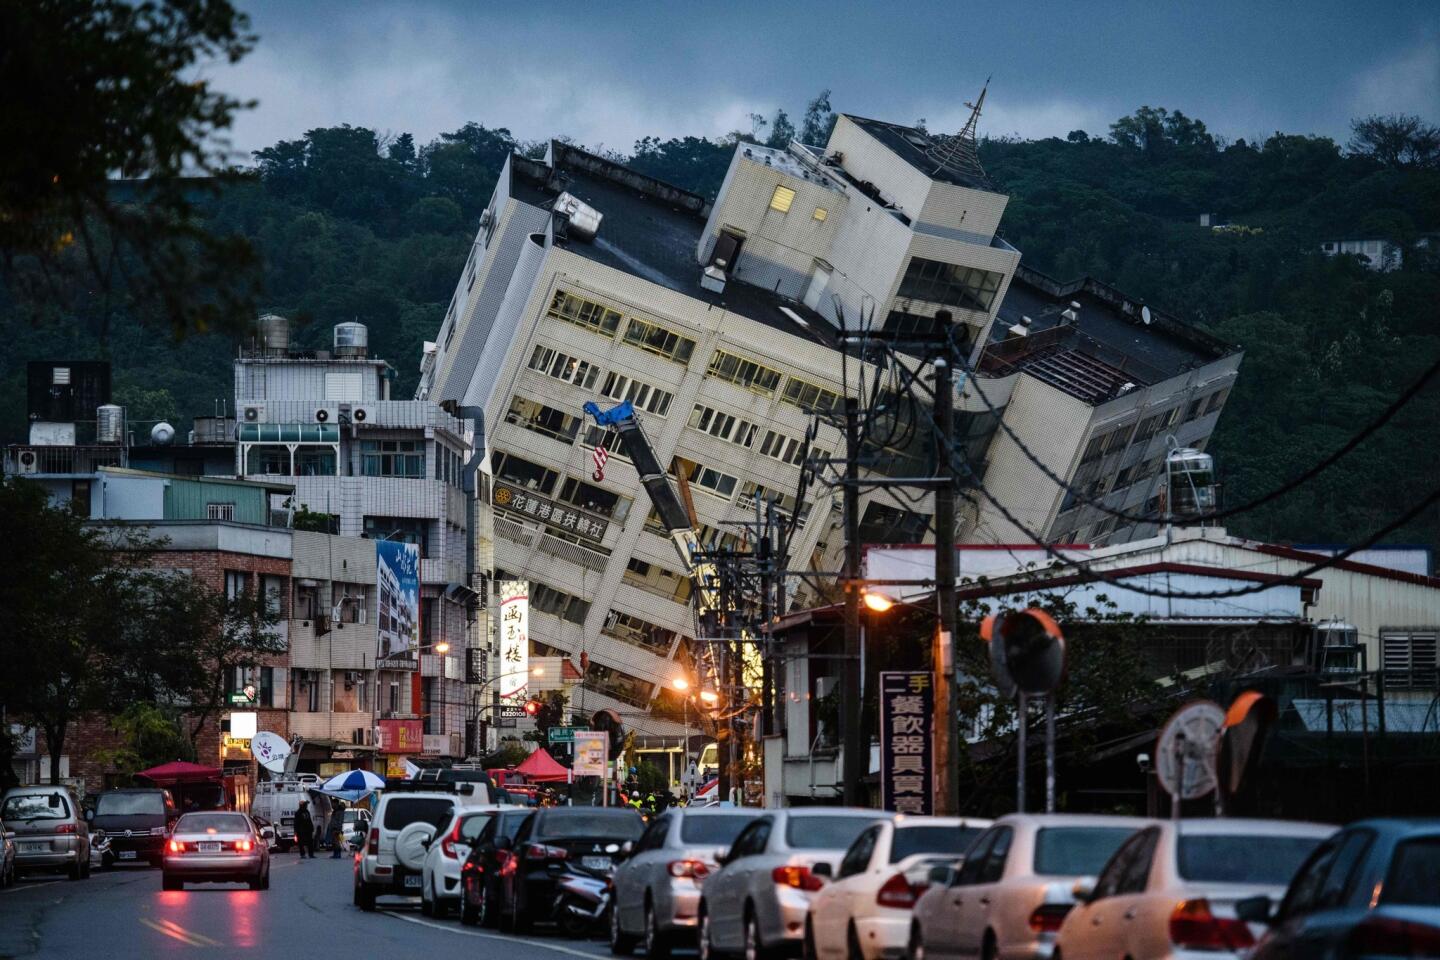 The Yun Tsui building leaning to one side after an overnight earthquake in the Taiwanese city of Hualien.